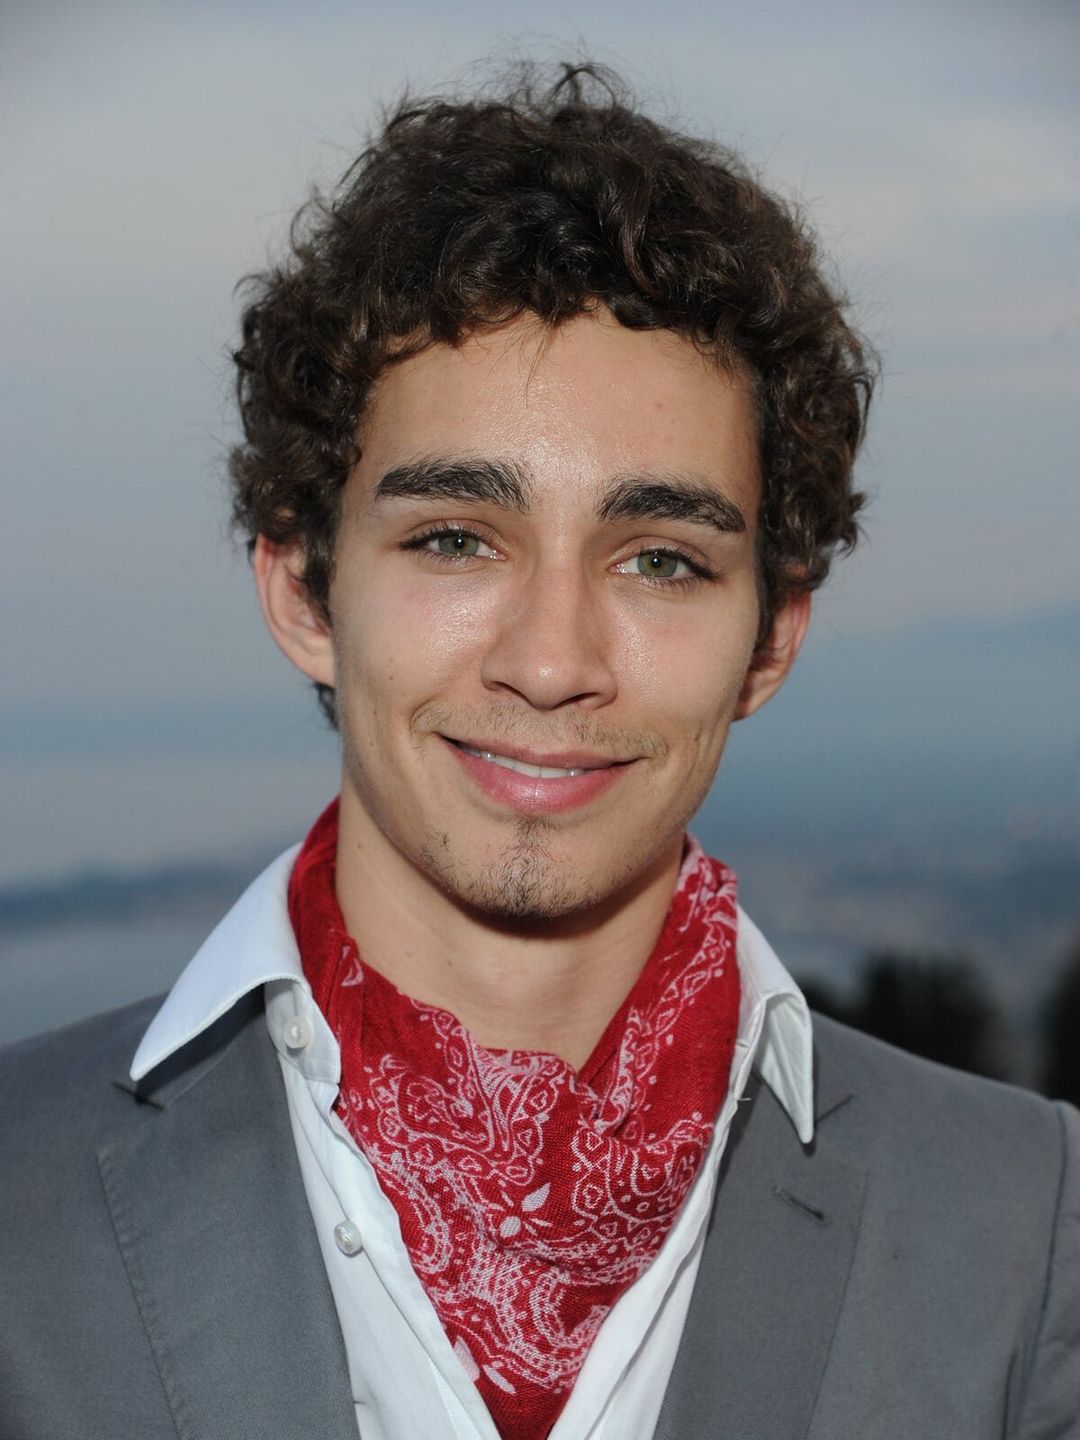 Robert Sheehan who is his mother